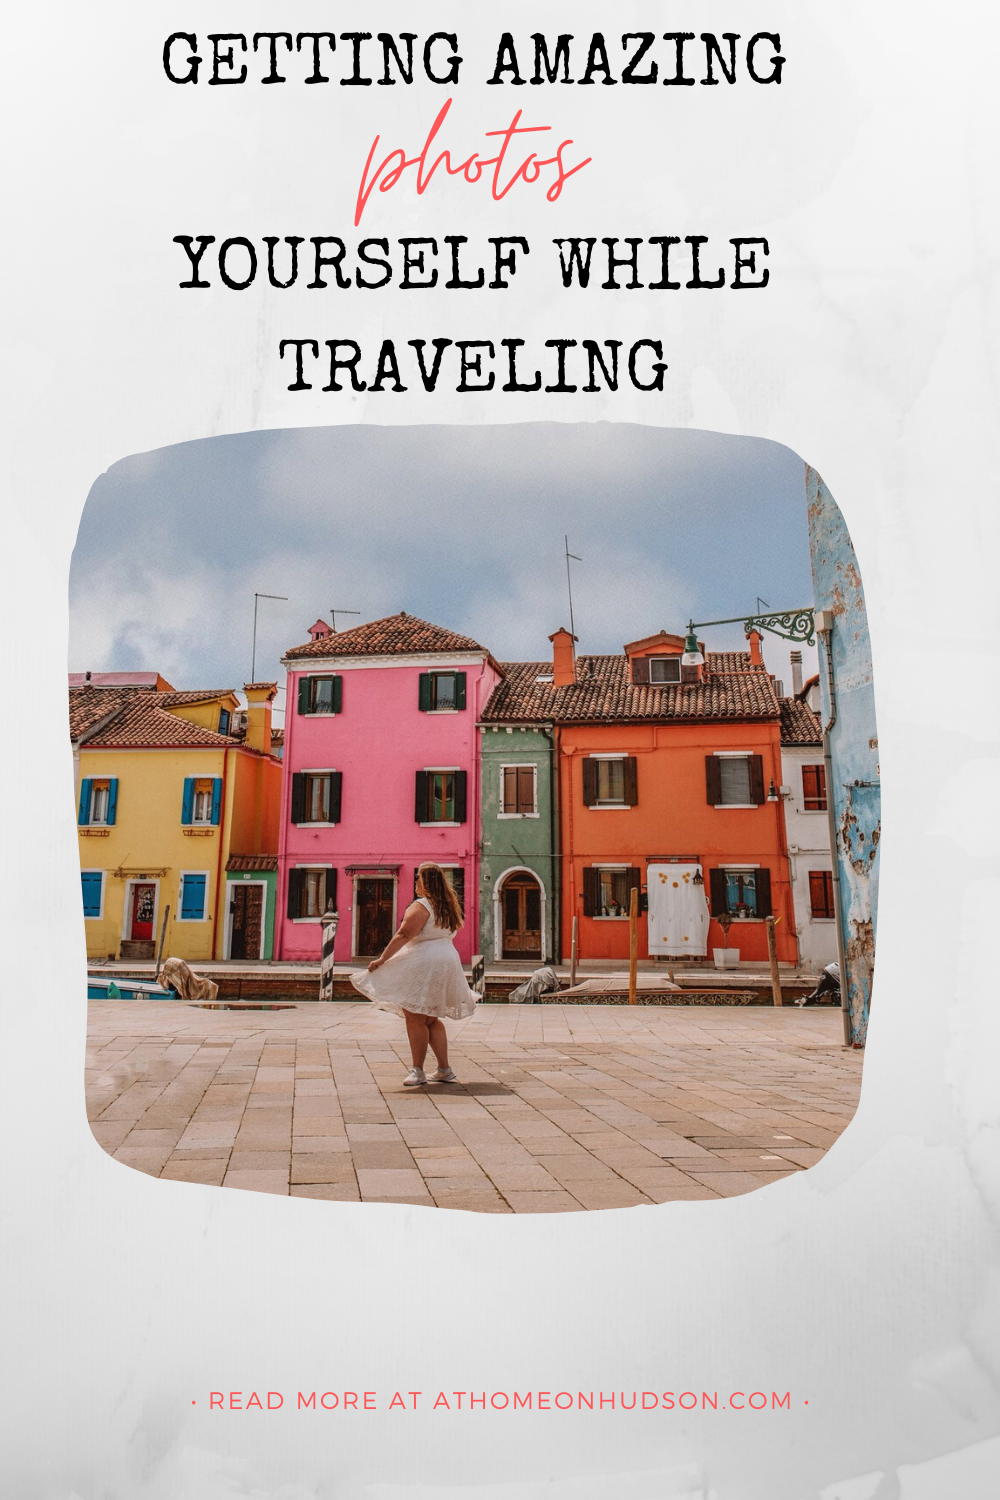 Getting amazing photos to share on social media has never been easier than with these tips and tricks that I have used extensively! Here is how to get incredible photos of yourself while traveling from a professional photographer.